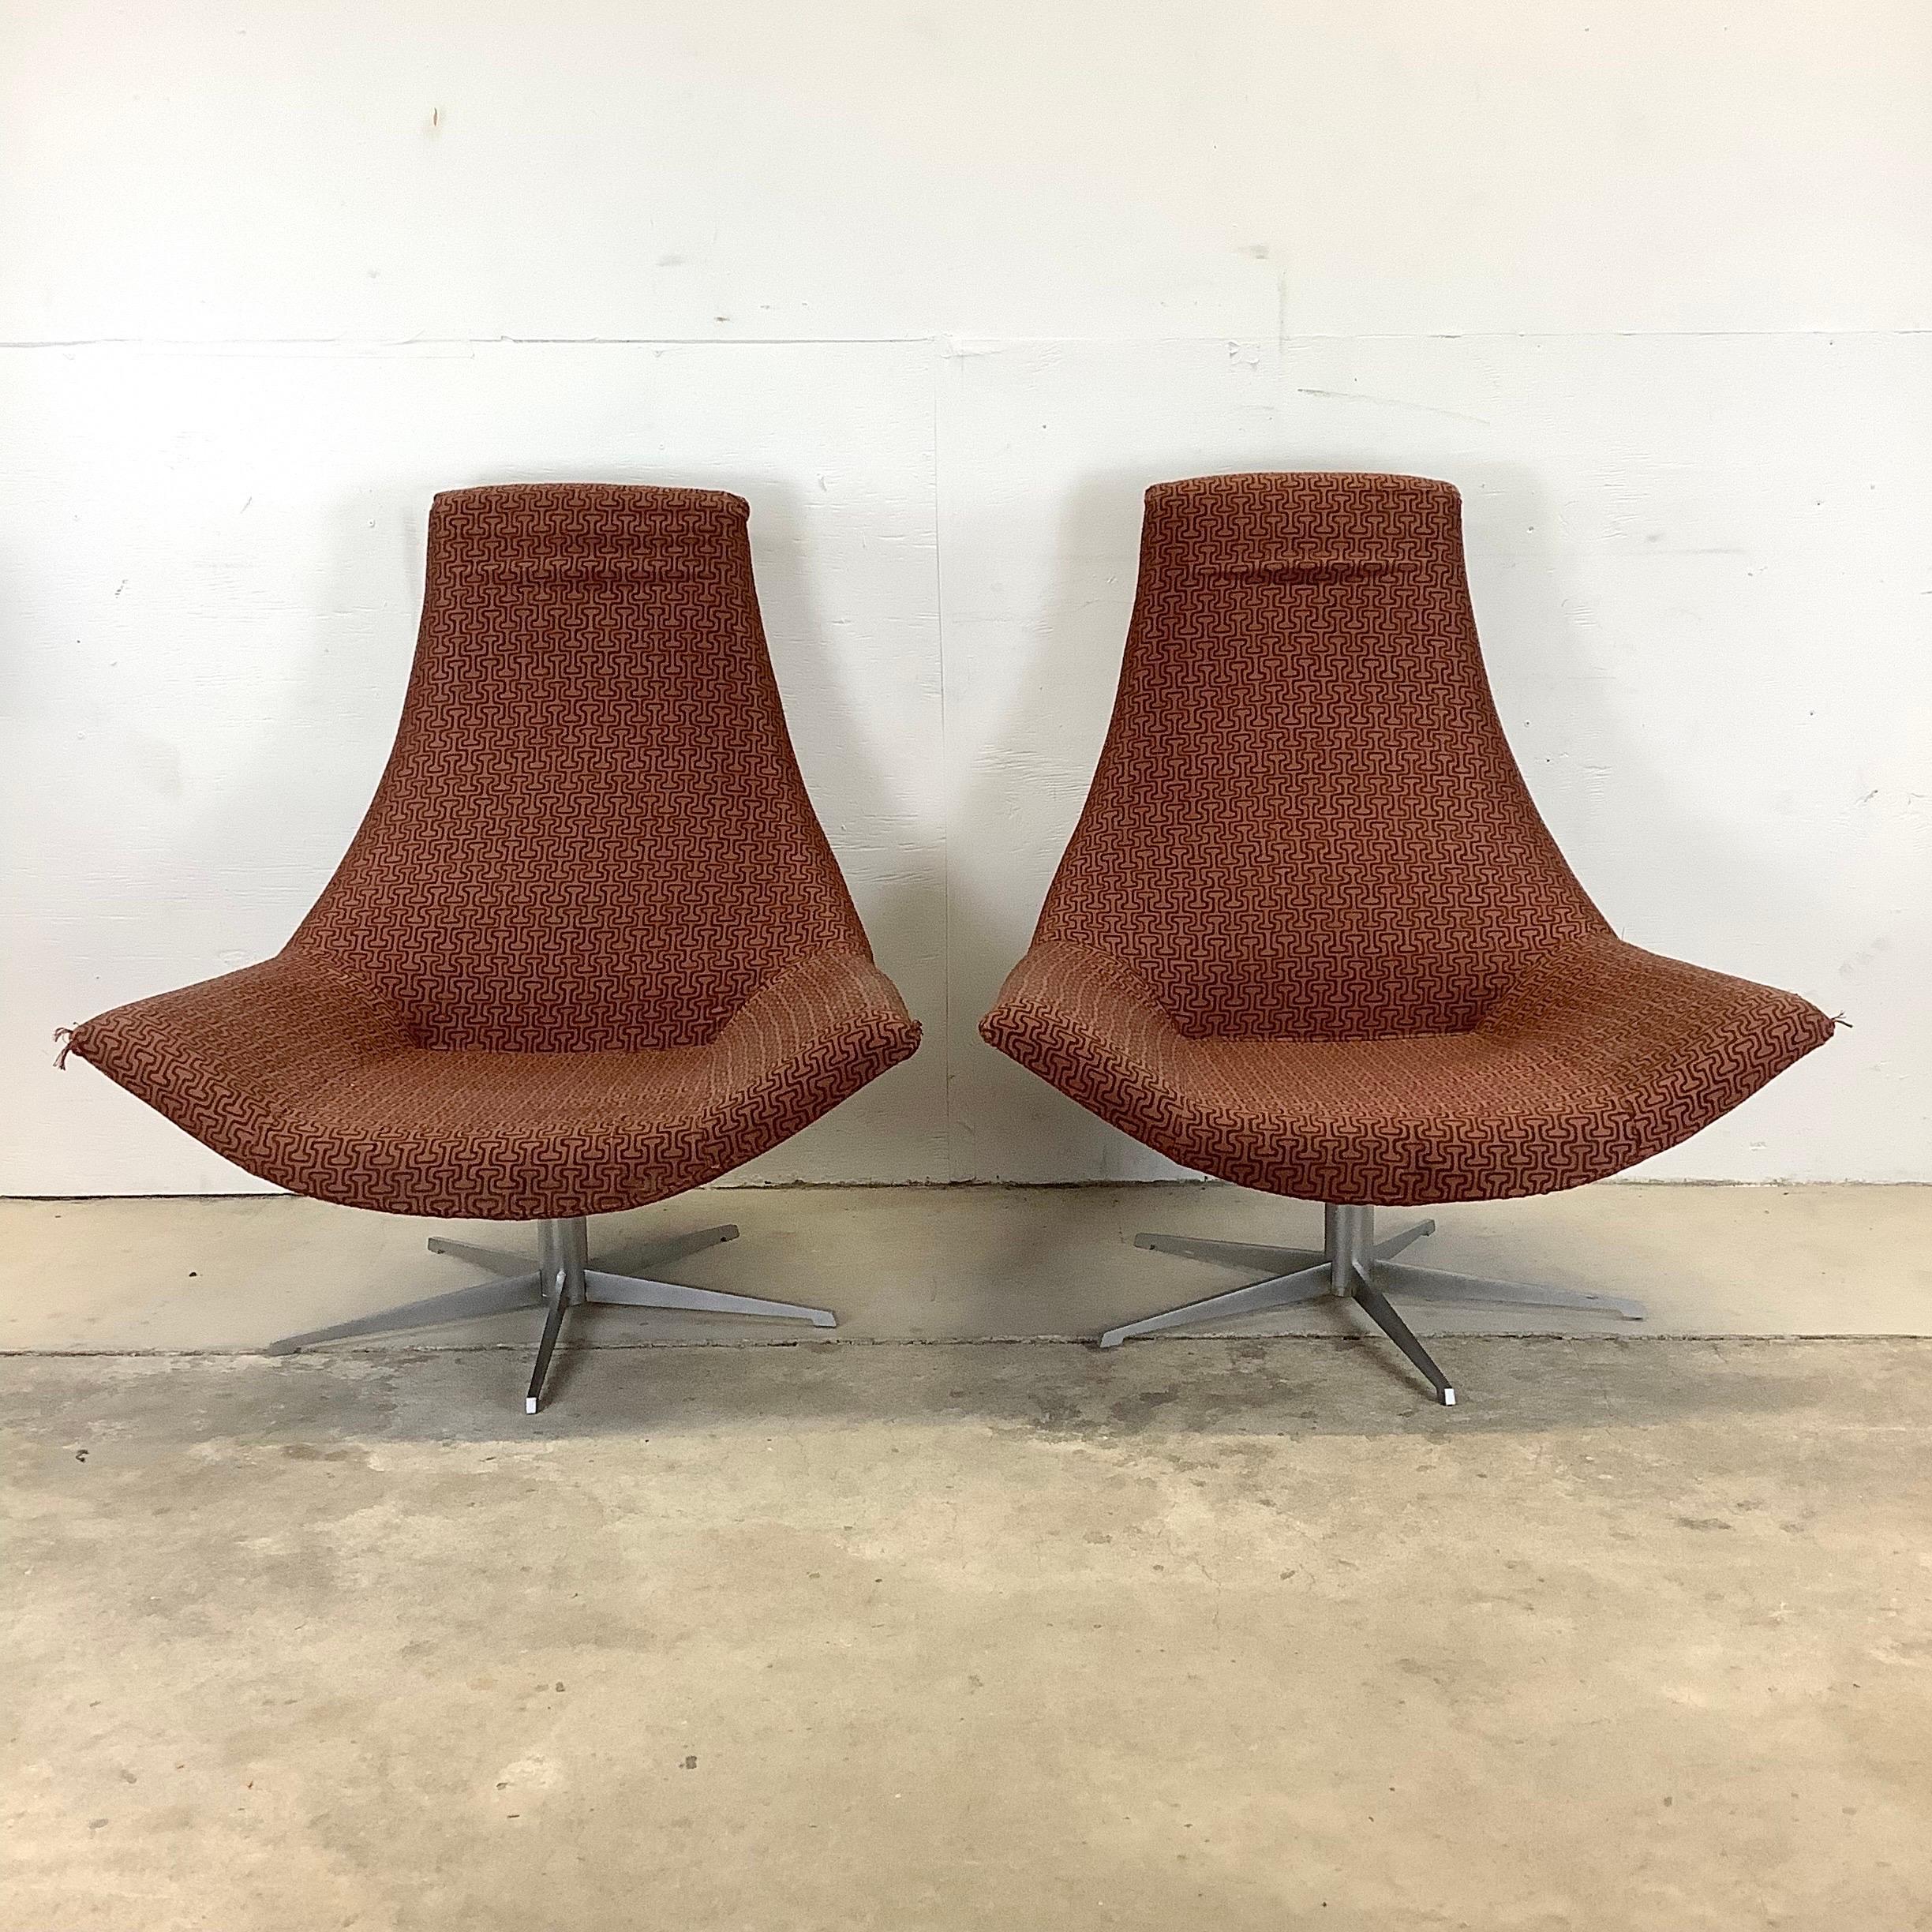 This impressive pair of matching modern lounge chairs feature distinctly Italian sculptural design while offering wide seats and swivel metal bases. The geometric patterned upholstery on this contemporary pair makes an elegant mcm style addition to